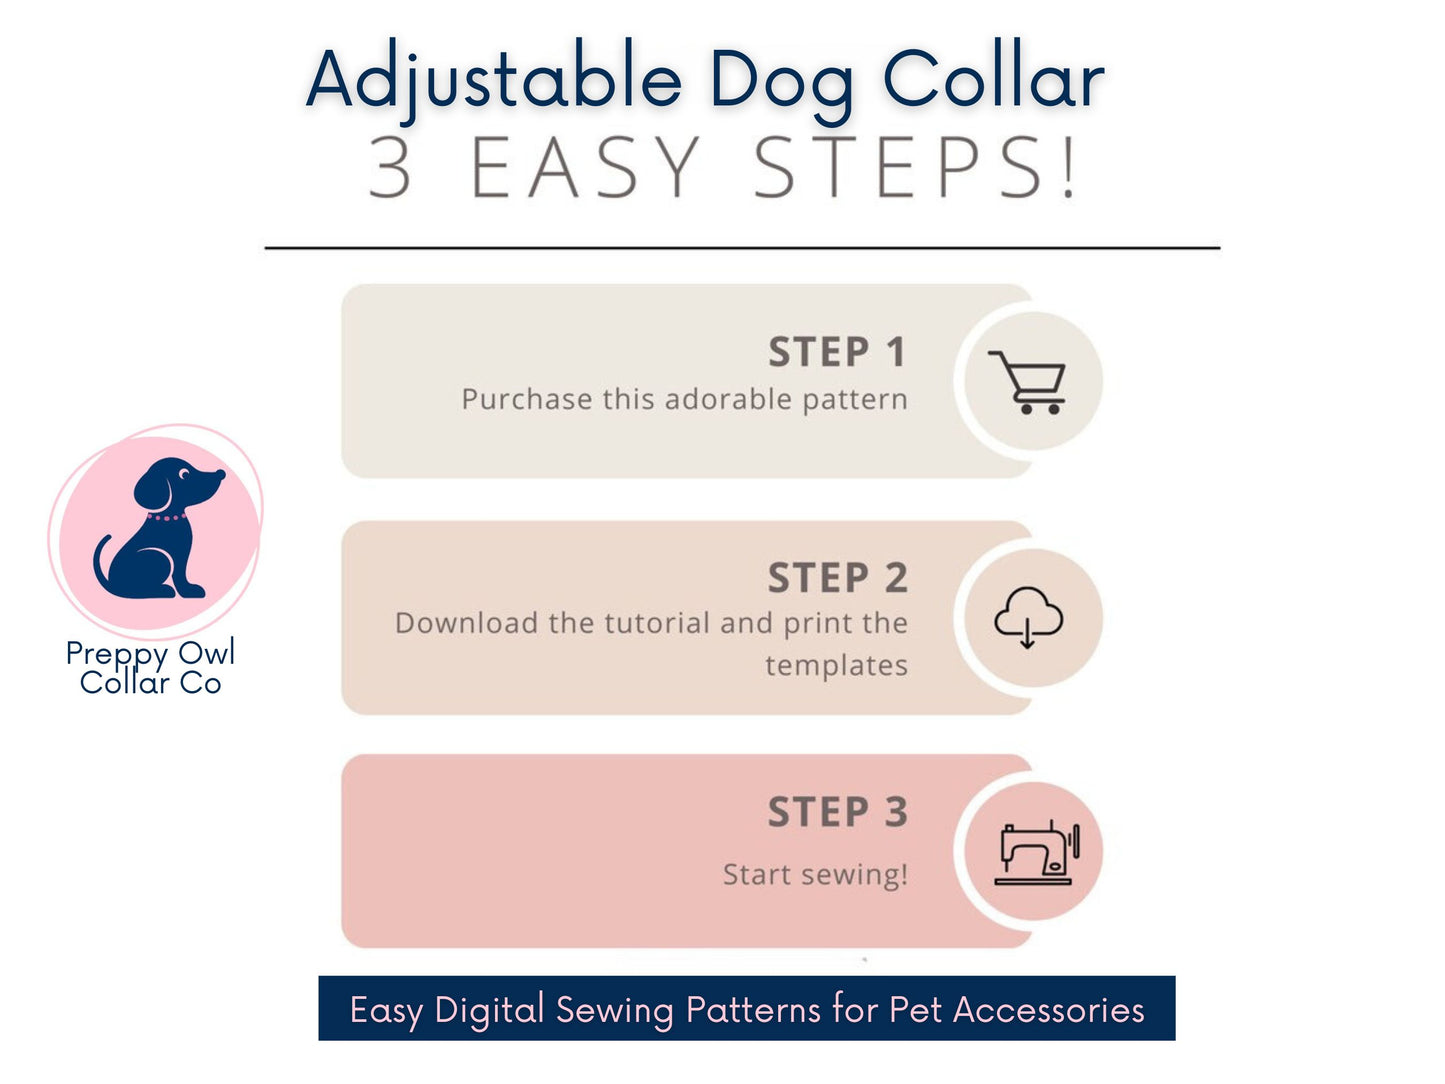 How to Make an Adjustable Fabric Dog Collar Sewing Instructions